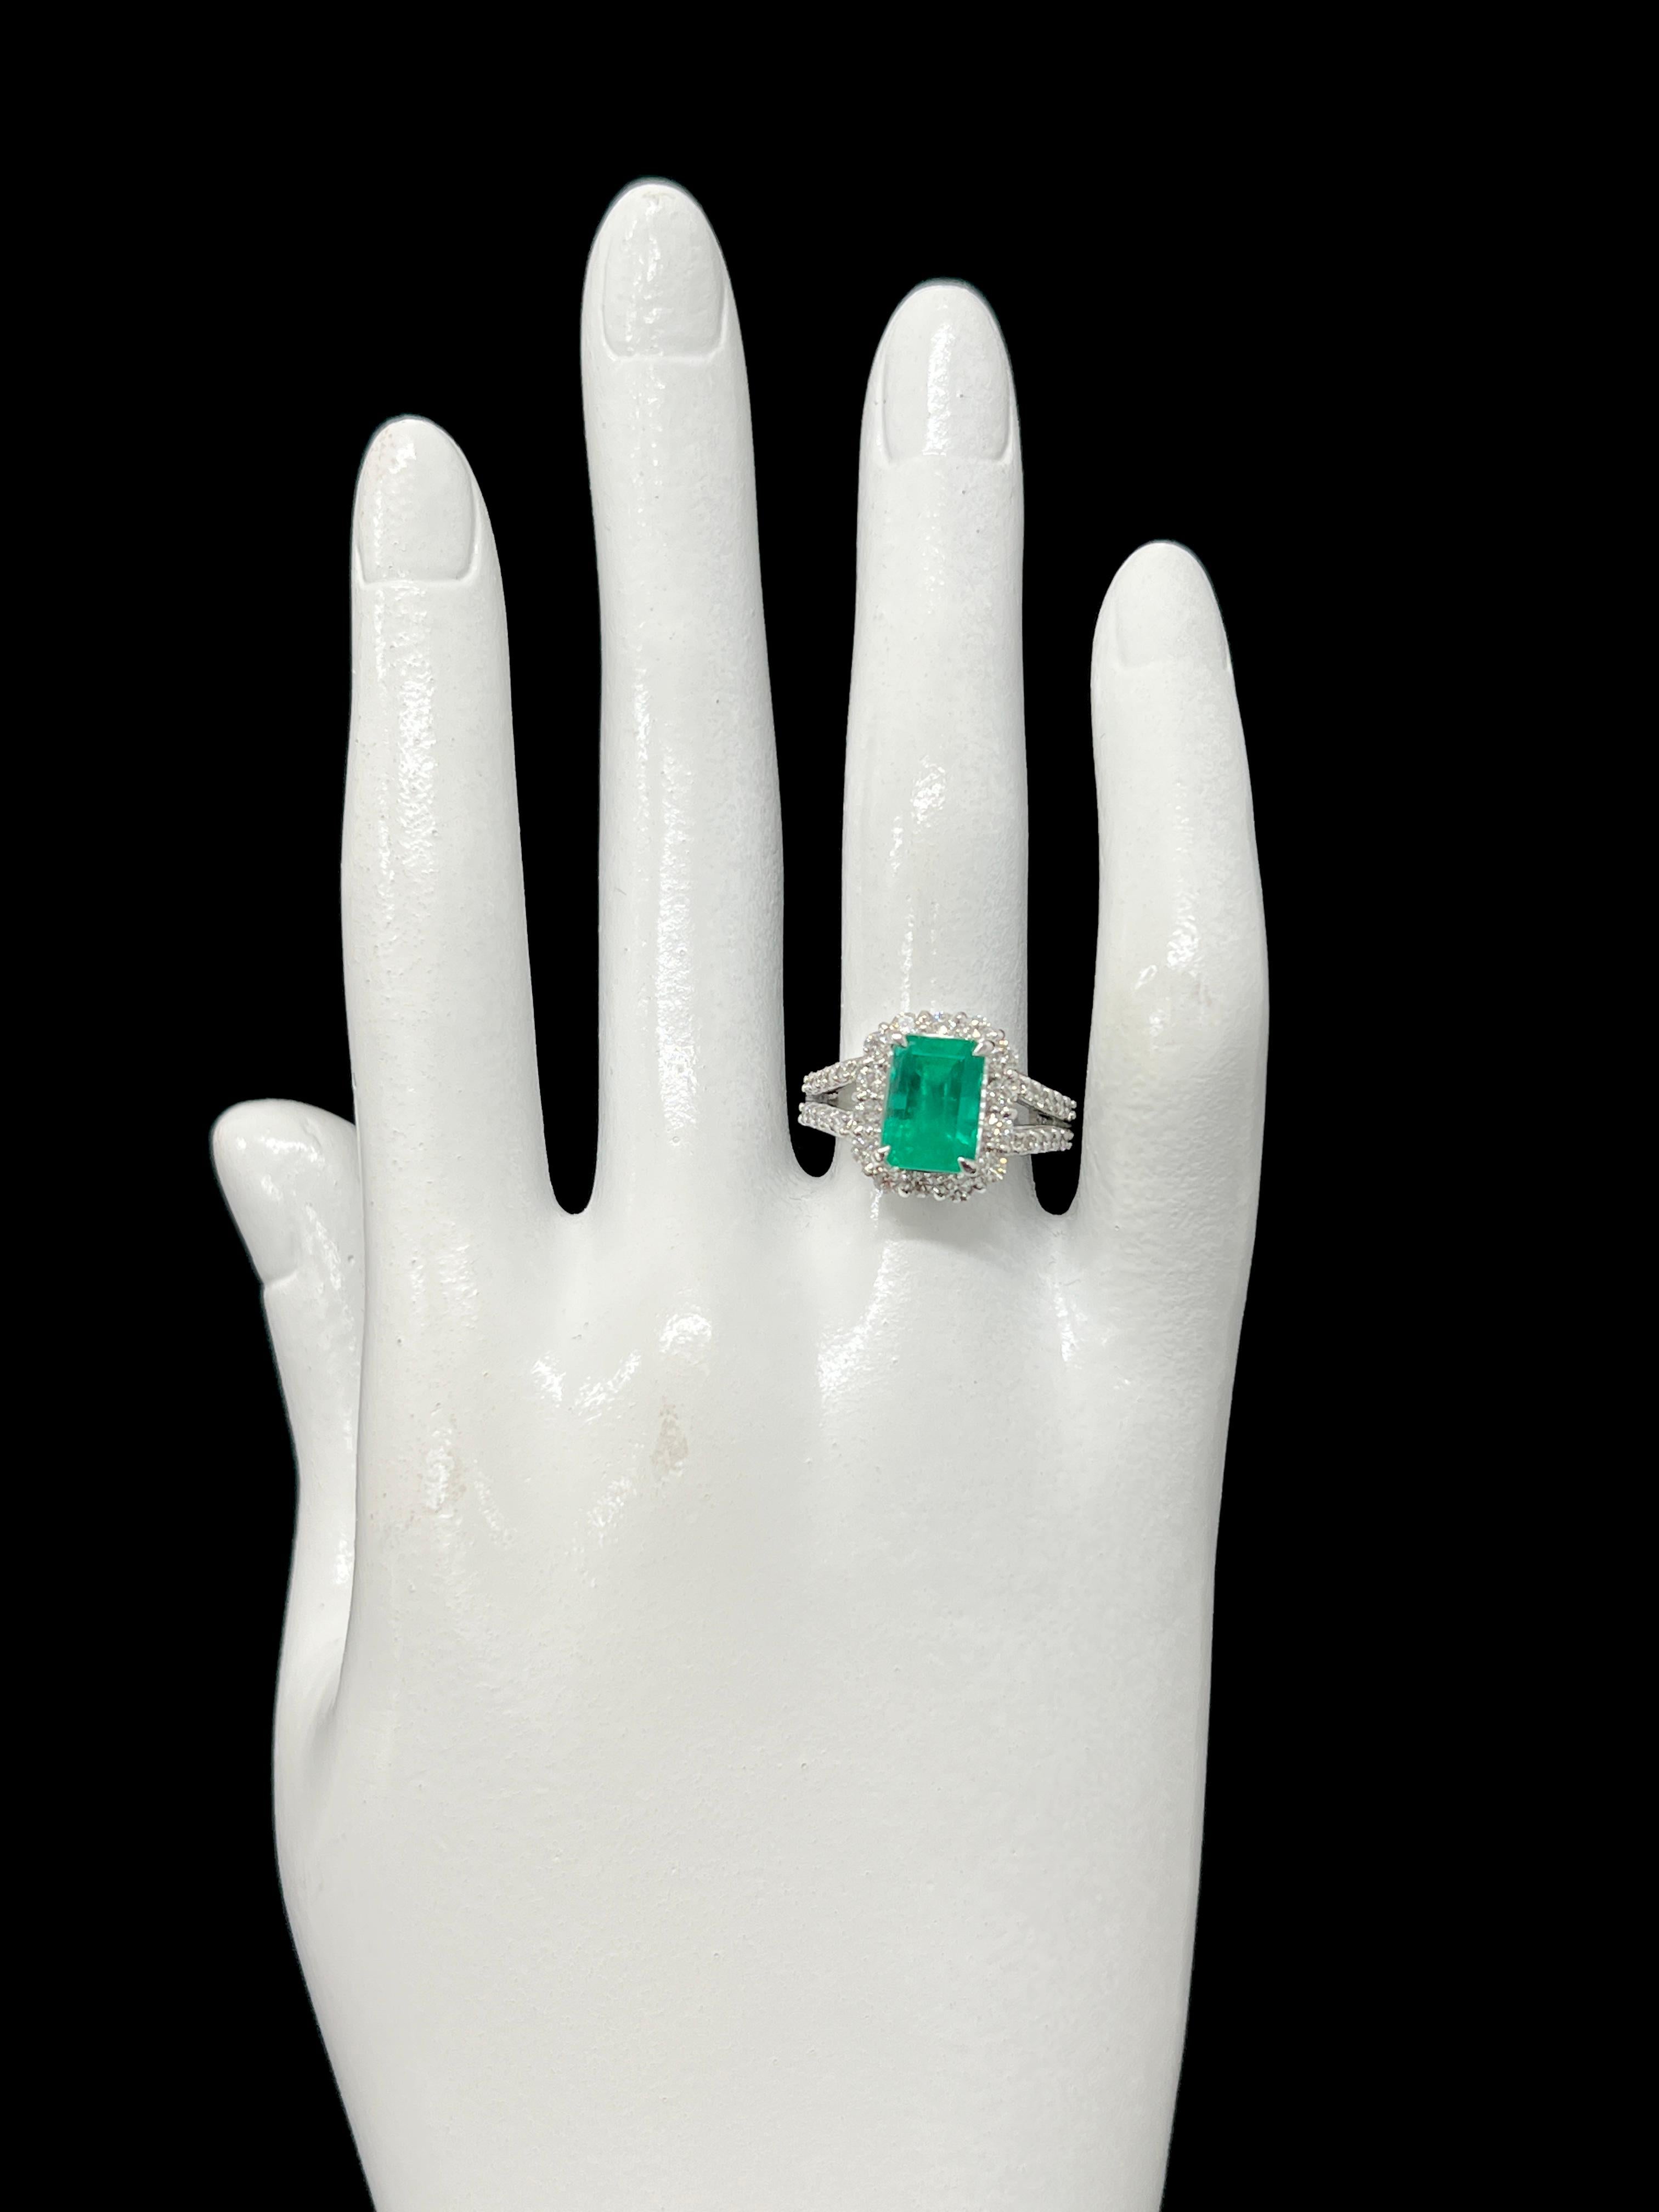 2.49 Carat Colombian Emerald and Diamond Ring Set in Platinum For Sale 1